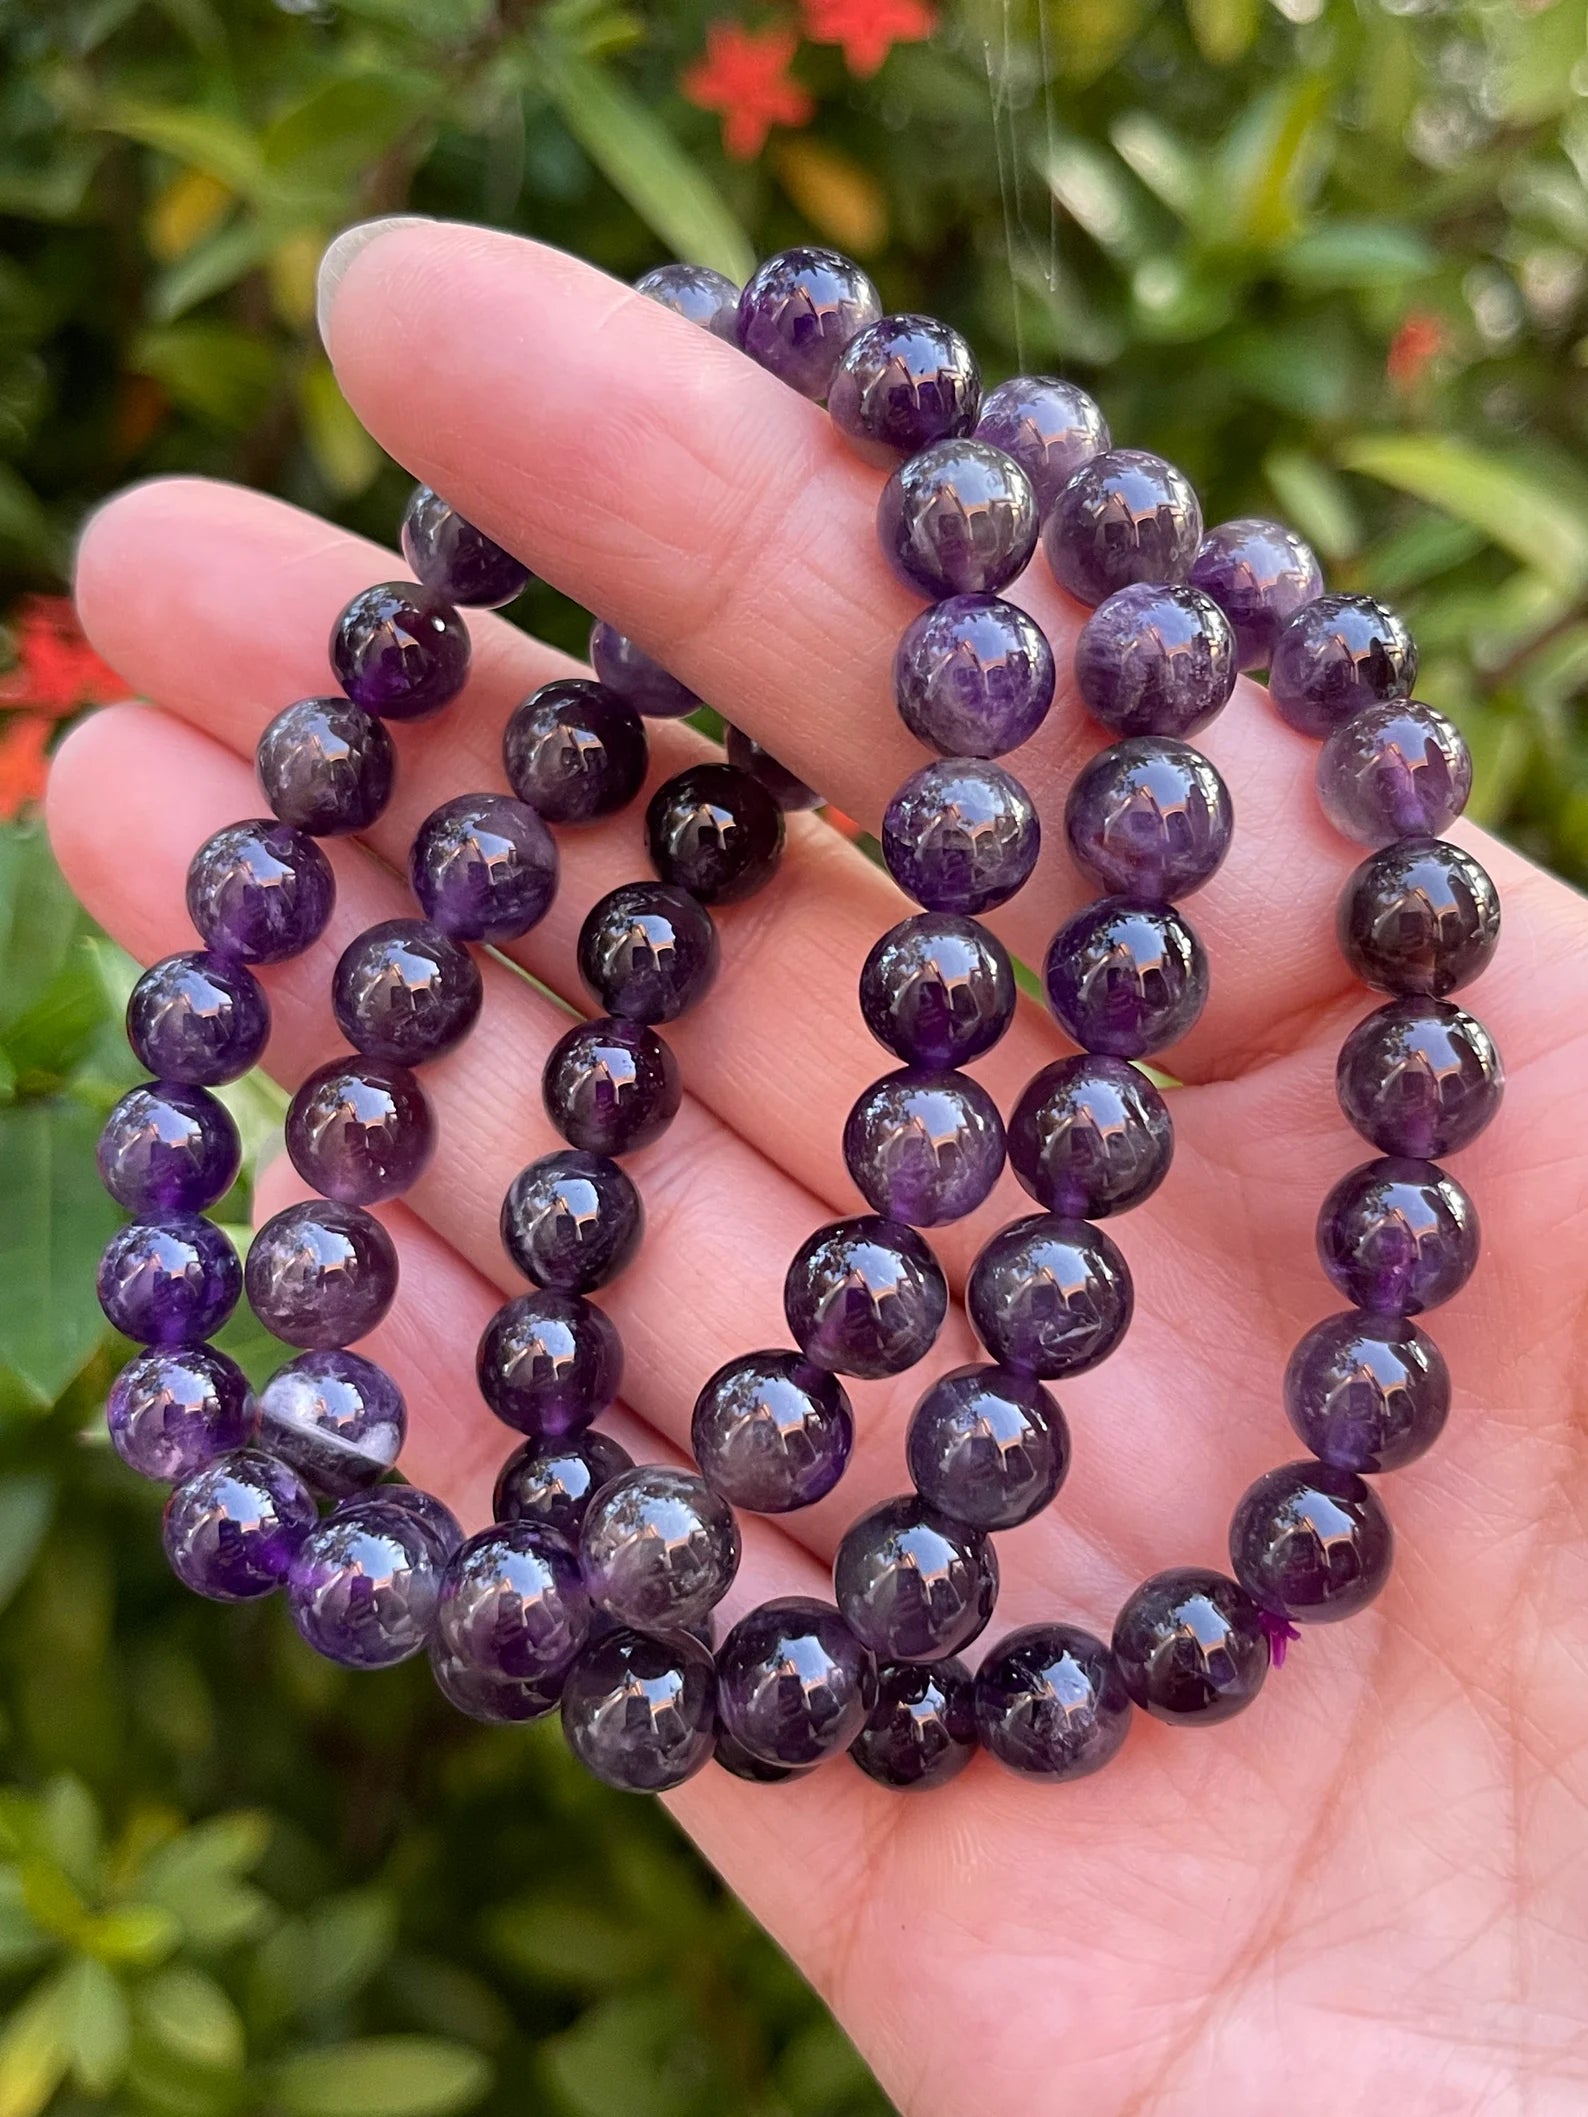 Amethyst crystal Stone Properties, Benefits and Uses Of The Purple Stone